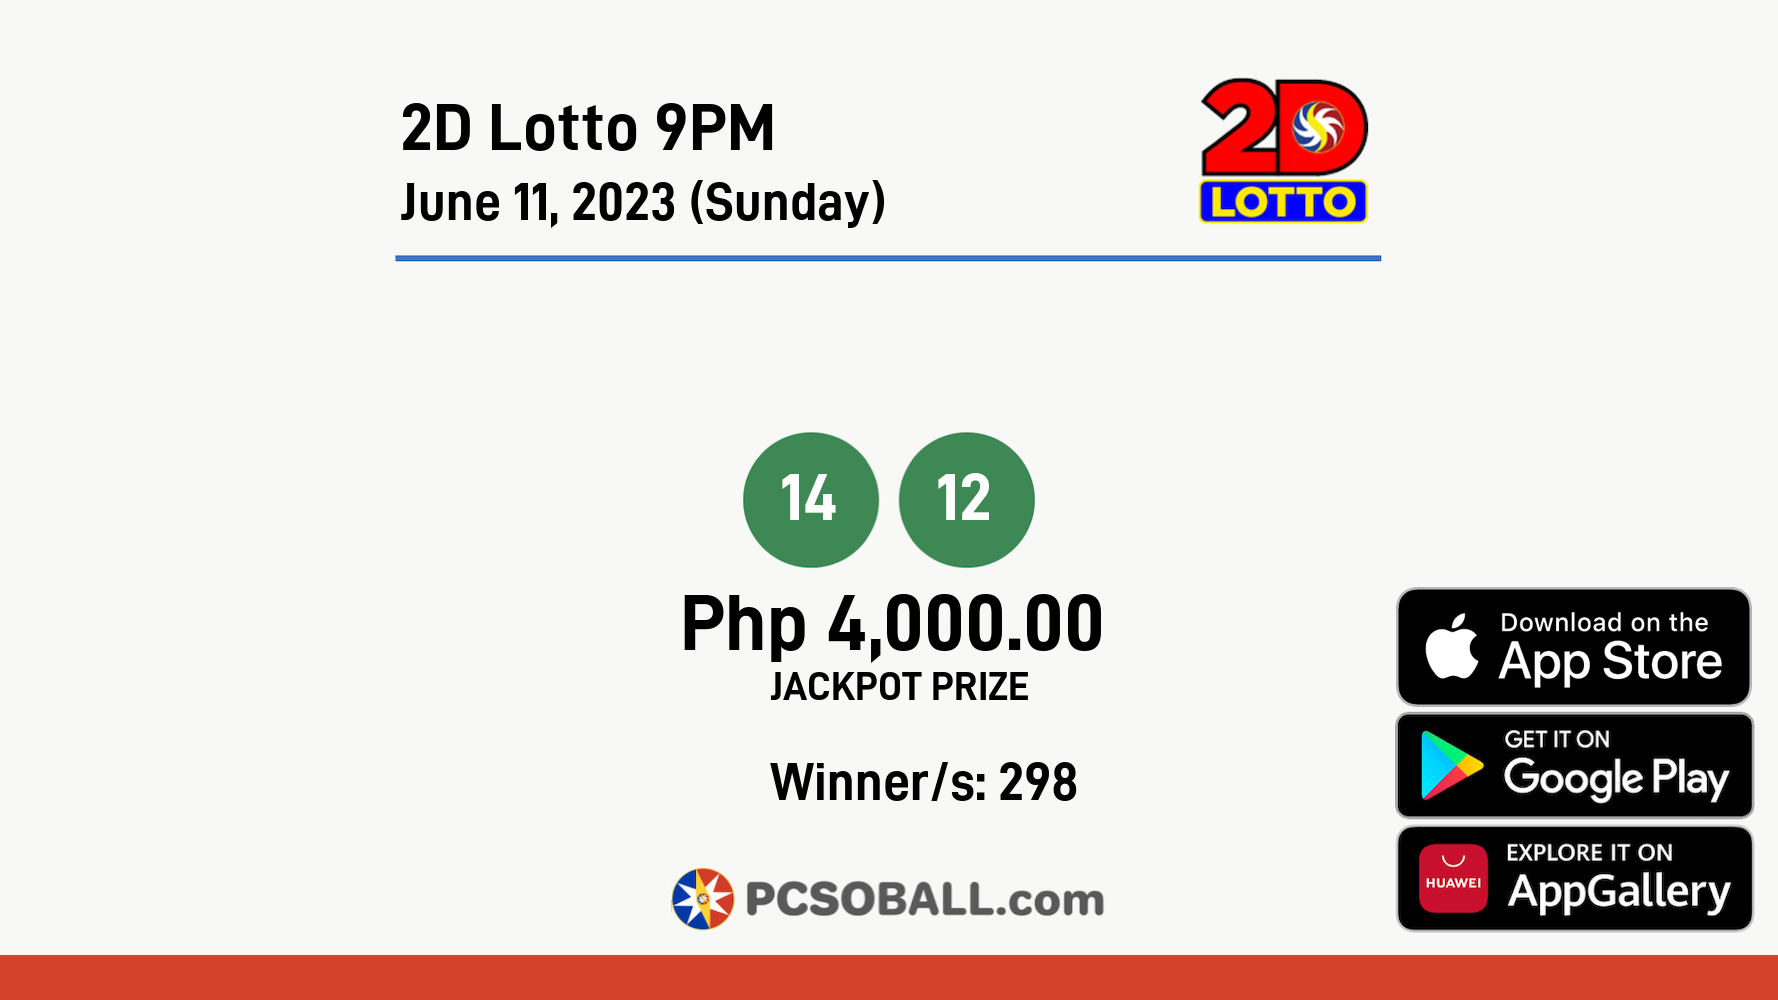 2D Lotto 9PM June 11, 2023 (Sunday) Result